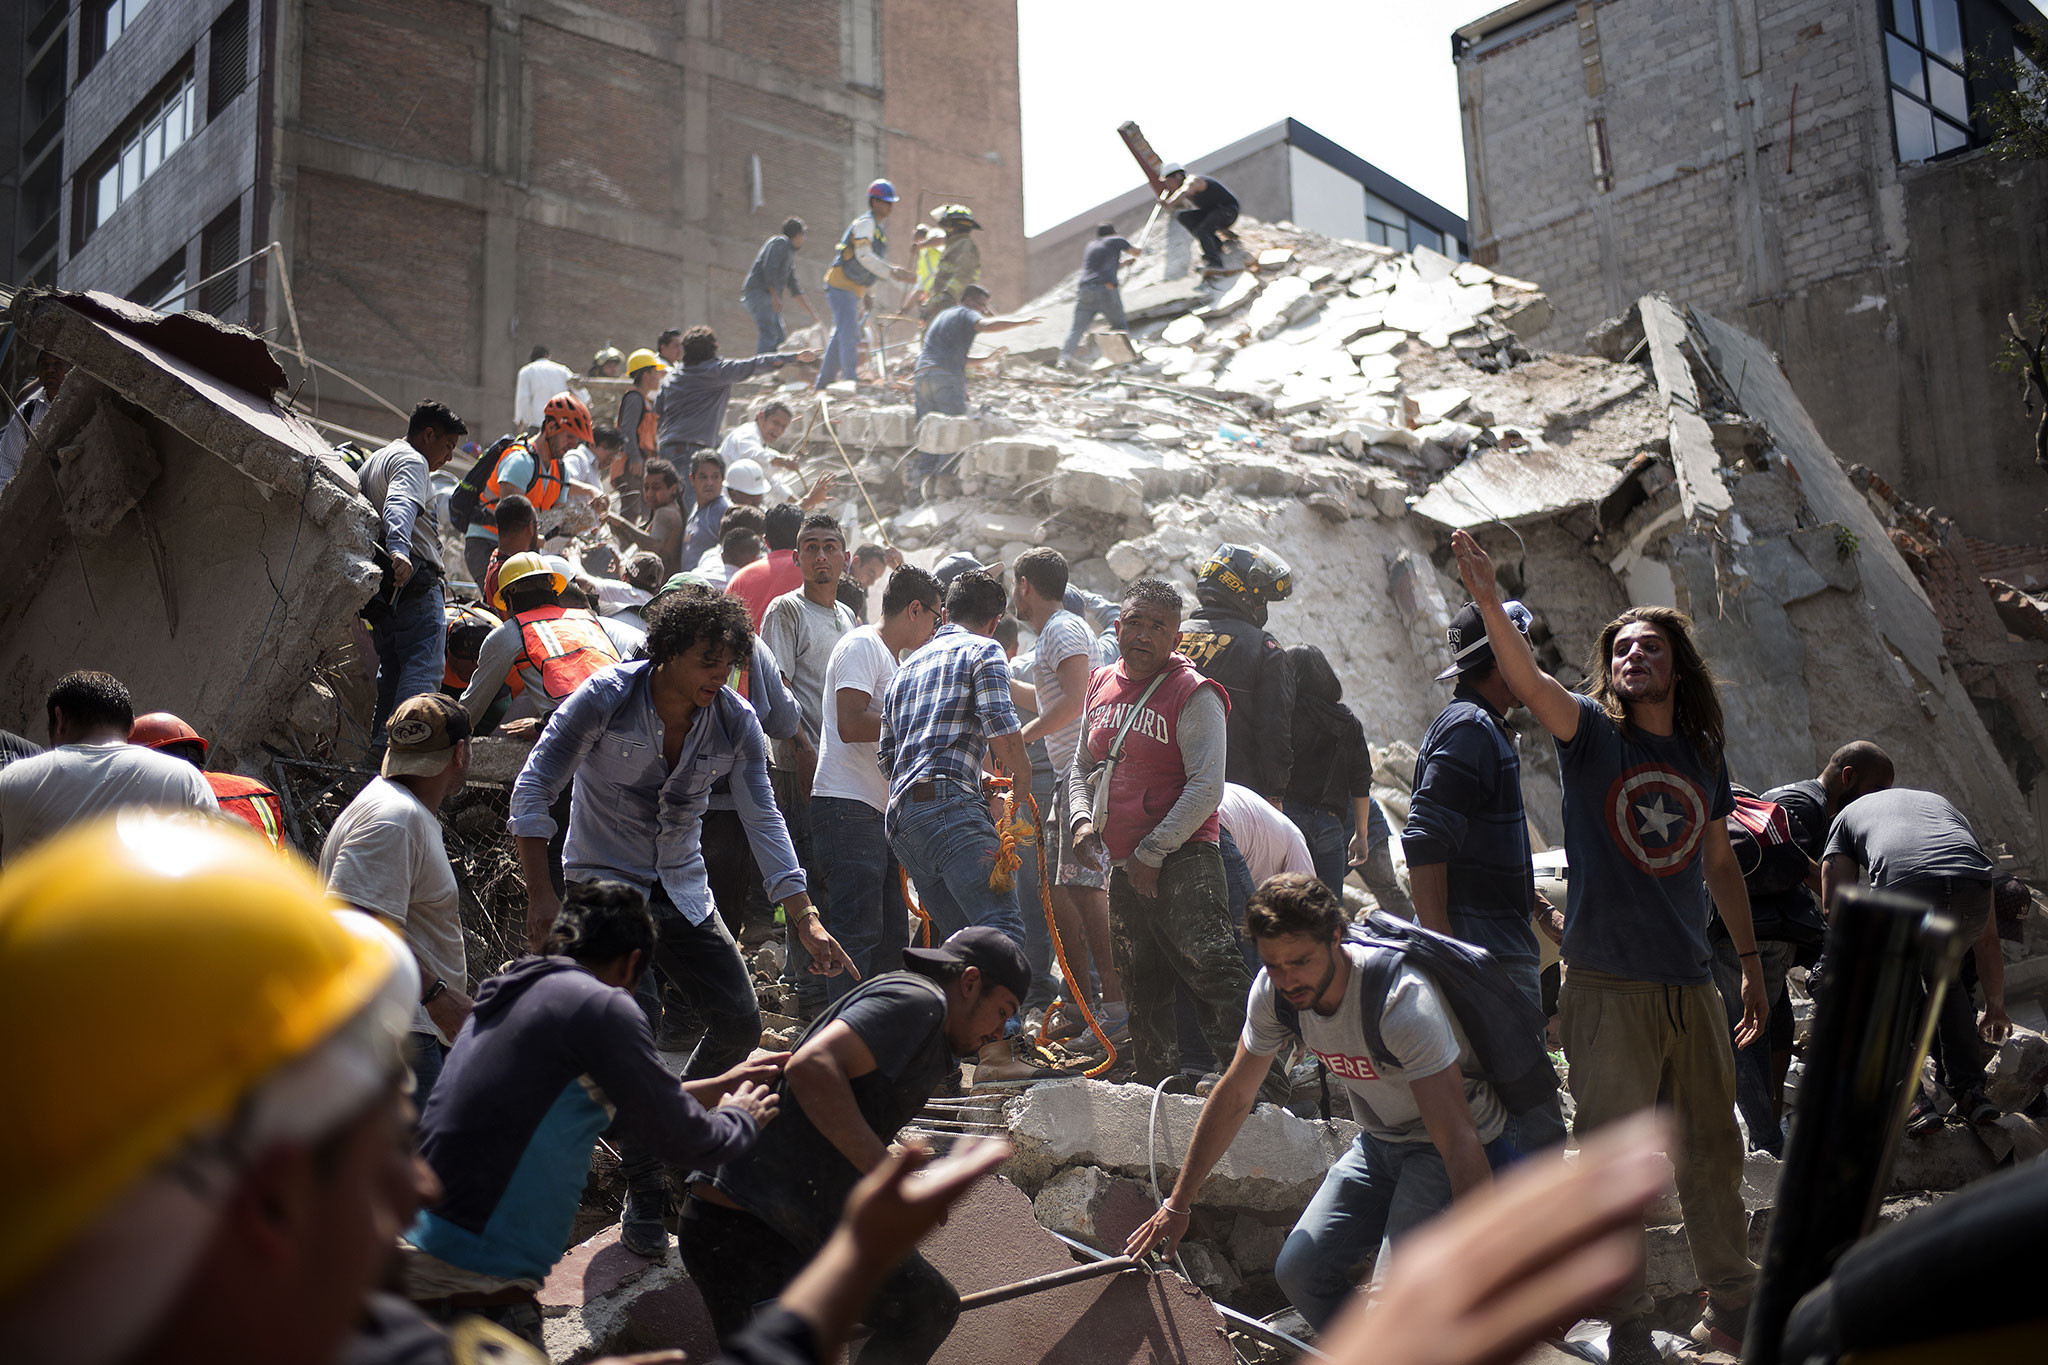 A total of 370 people were killed in the earthquake that hit Mexico in September ©Getty Images